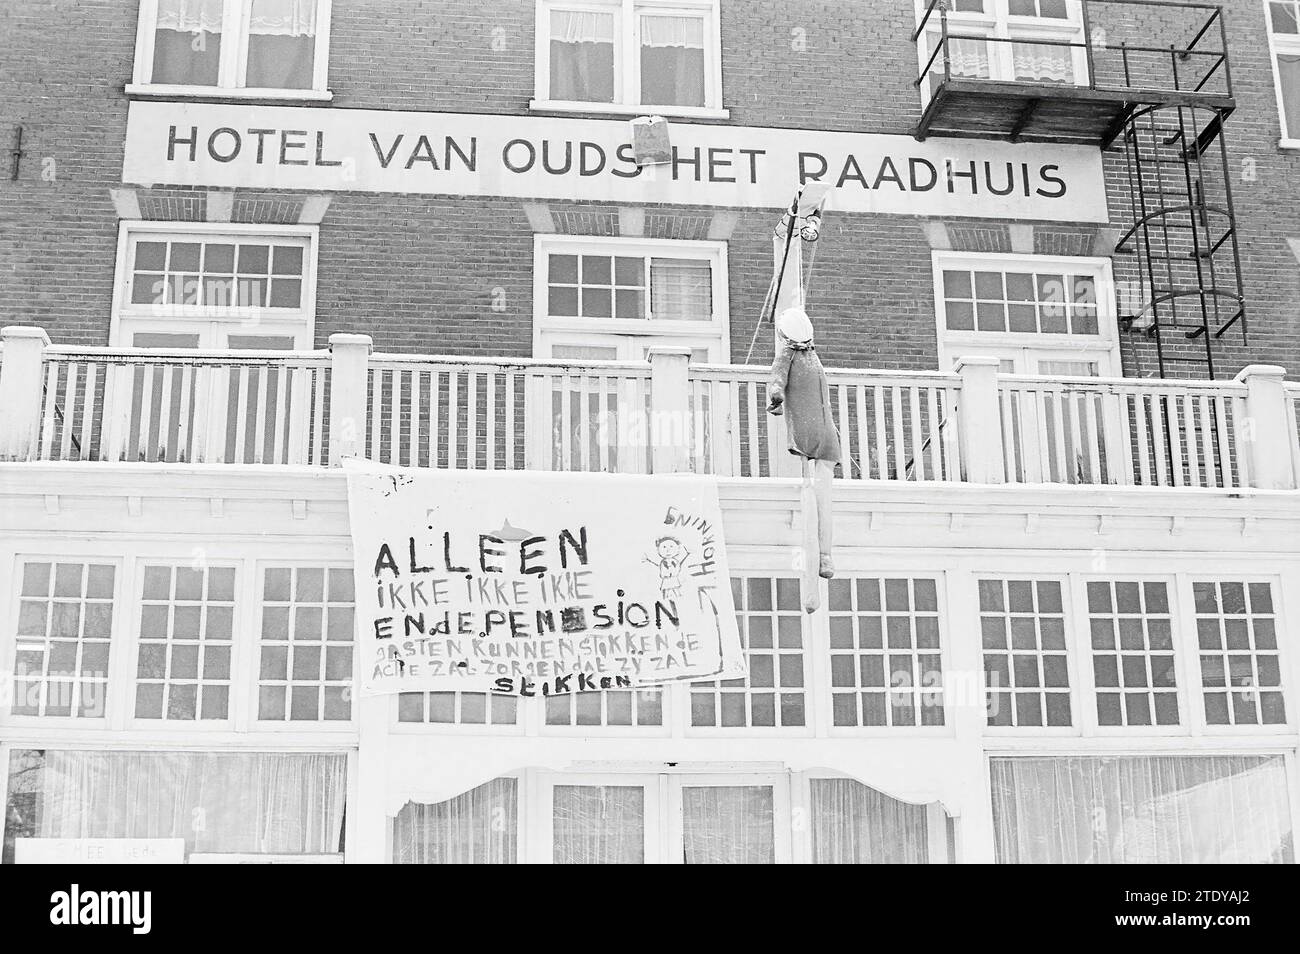 Doll on gallows at the Van Ouds Raadhuis, Demonstration, Overveen, Zijlweg, 31-12-1970, Whizgle News from the Past, Tailored for the Future. Explore historical narratives, Dutch The Netherlands agency image with a modern perspective, bridging the gap between yesterday's events and tomorrow's insights. A timeless journey shaping the stories that shape our future. Stock Photo